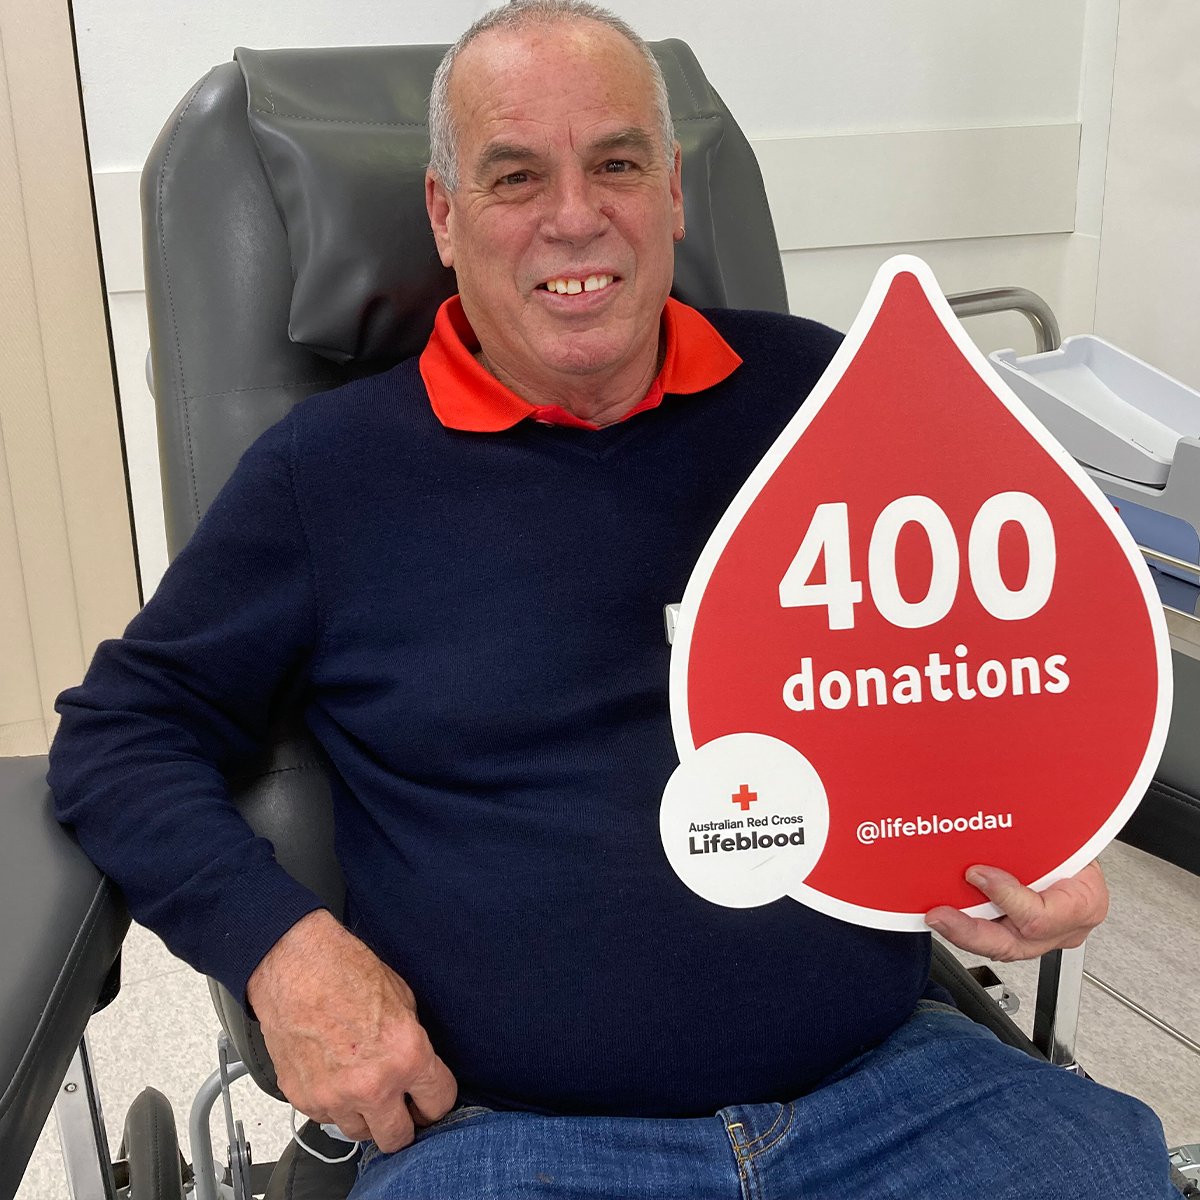 Bob has been a Lifeblood volunteer for 16 years, ever ready to drive donors in the courtesy bus to the donor centre, or whip them up a milkshake in refreshments. Recently Bob celebrated his 400th milestone donation at our Garran Donor Centre. Thank you for all you do, Bob.